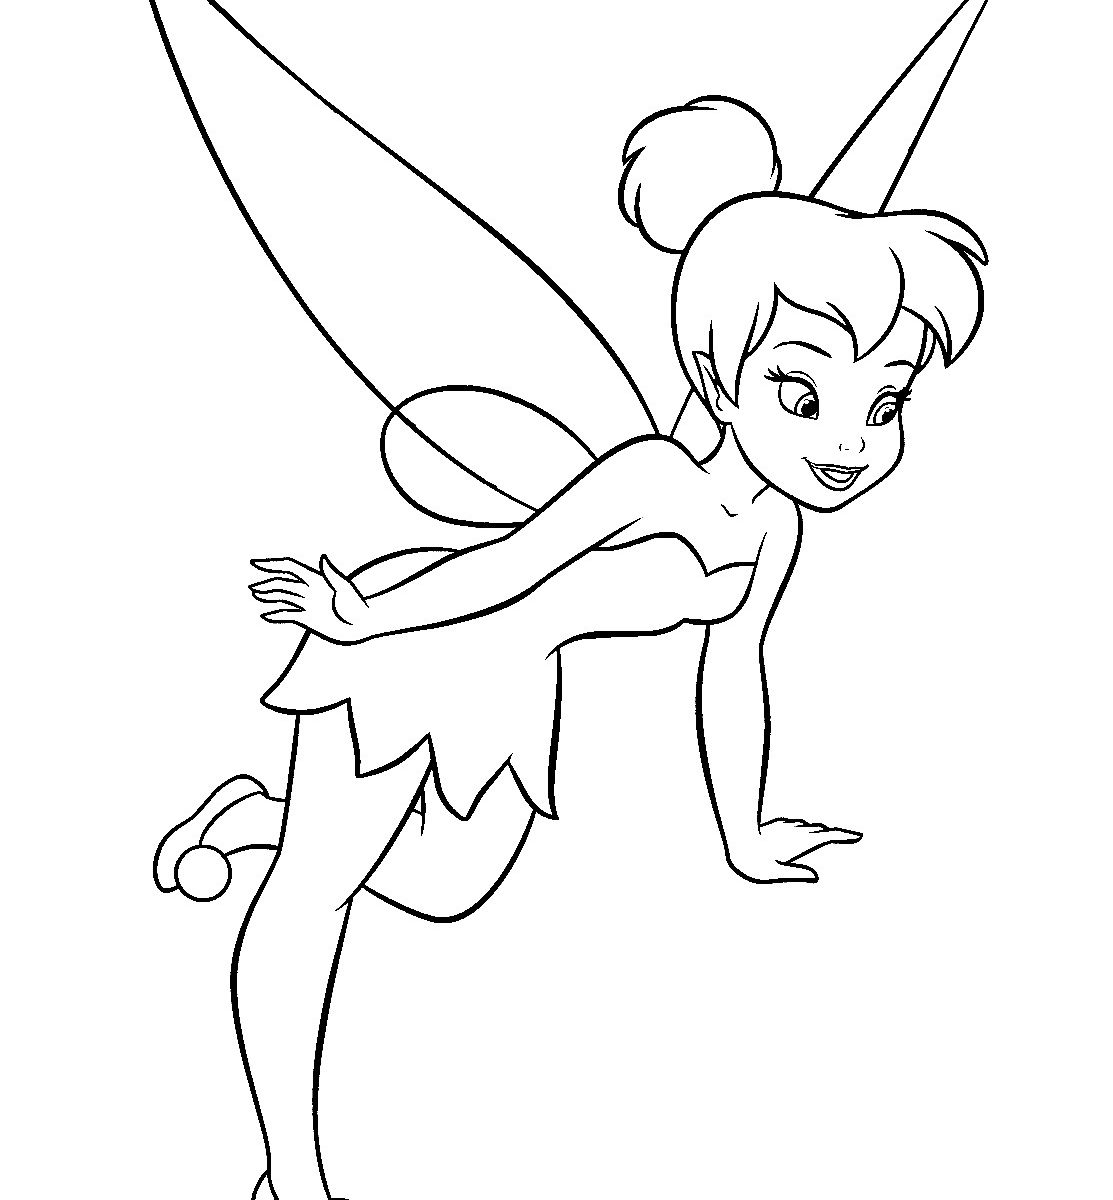 Free Coloring Pages Of Fairies Coloring Pages Pixie Hollow Coloring Pages Free For Adults